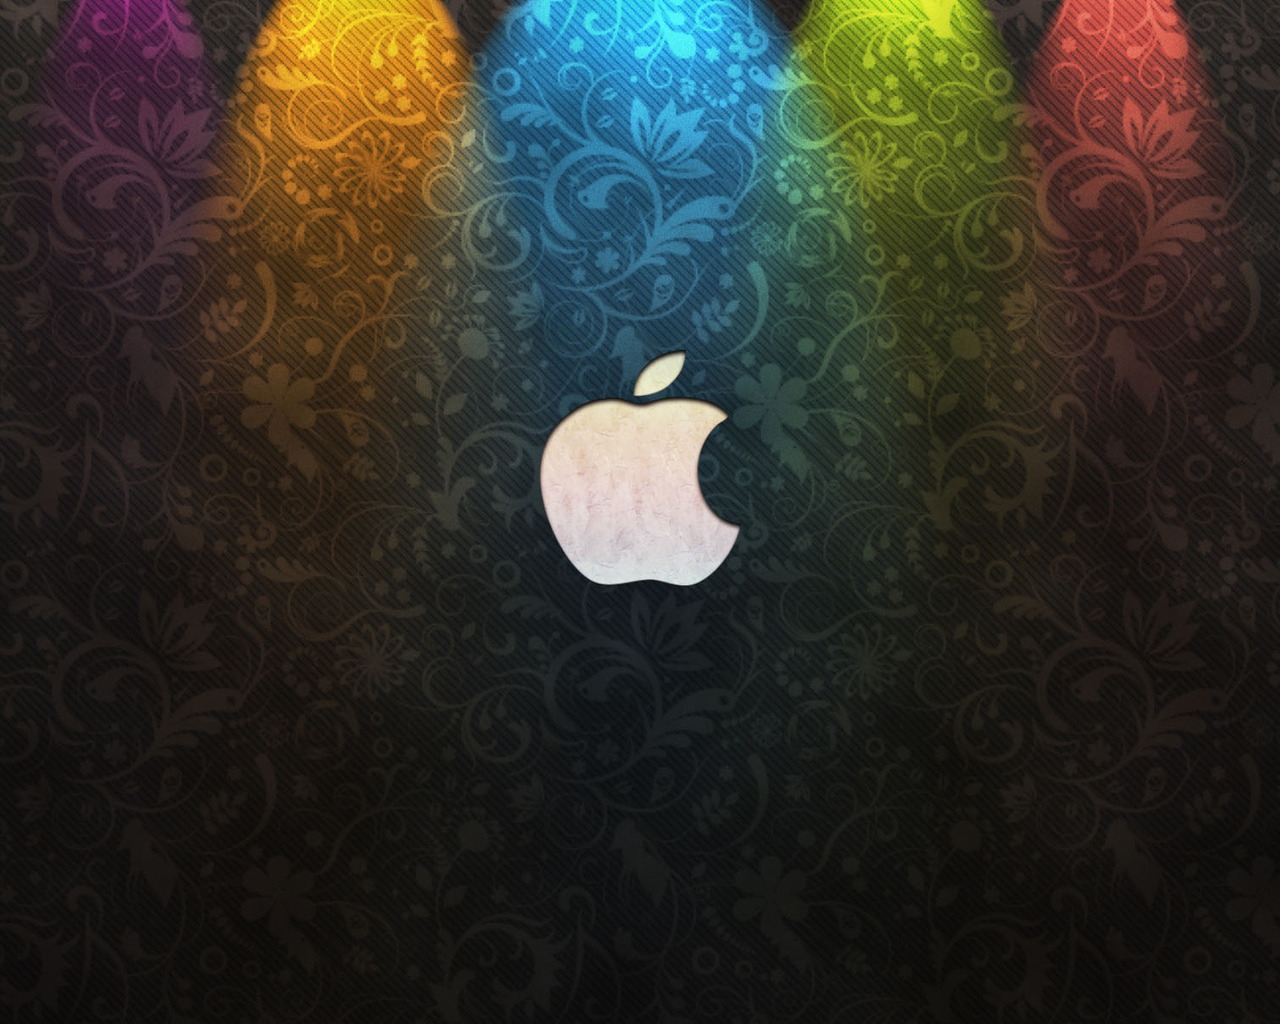 Apple Logo and Flower Background for 1280 x 1024 resolution